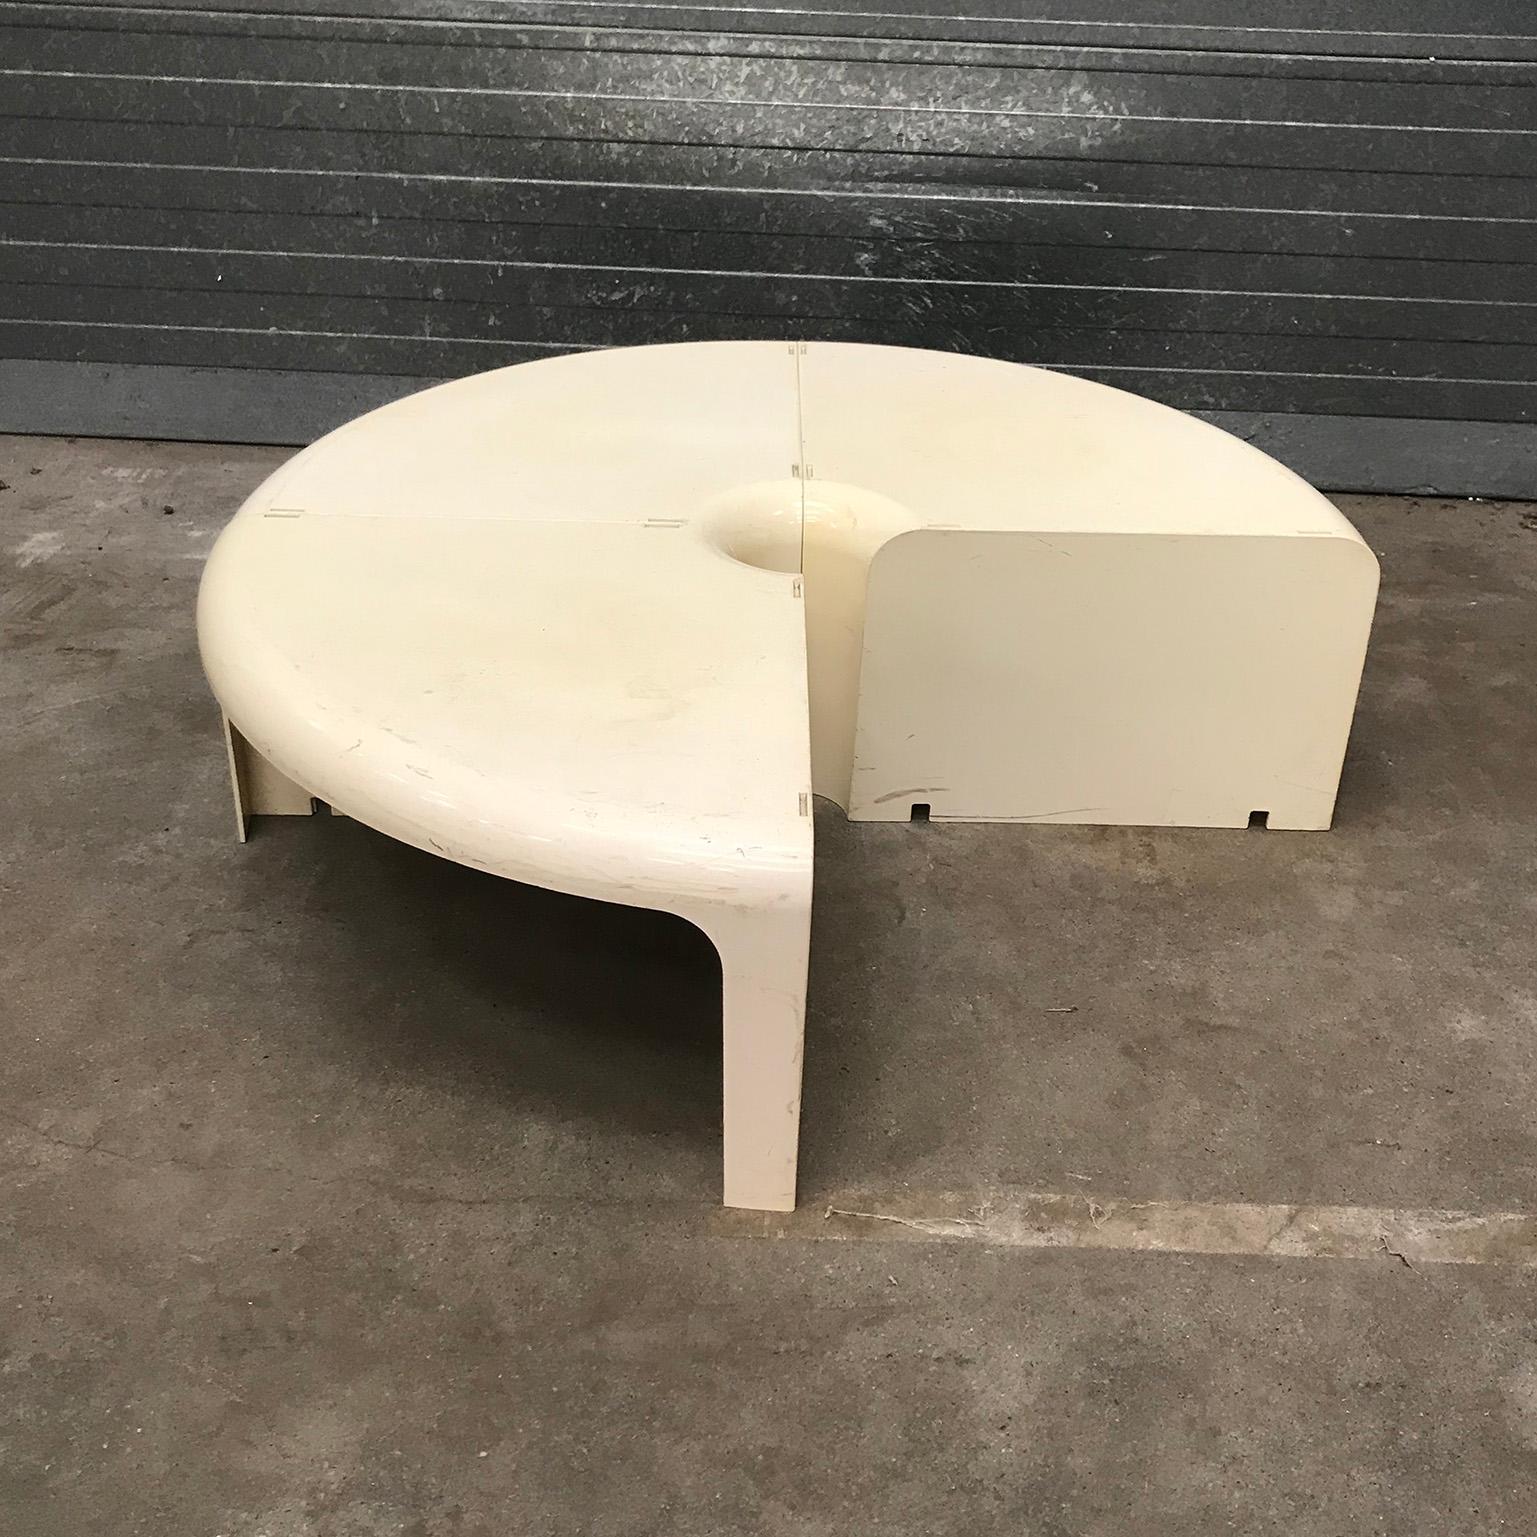 Three Half Round Plastic Side Tables in Off-White, circa 1970 In Good Condition For Sale In Amsterdam IJMuiden, NL